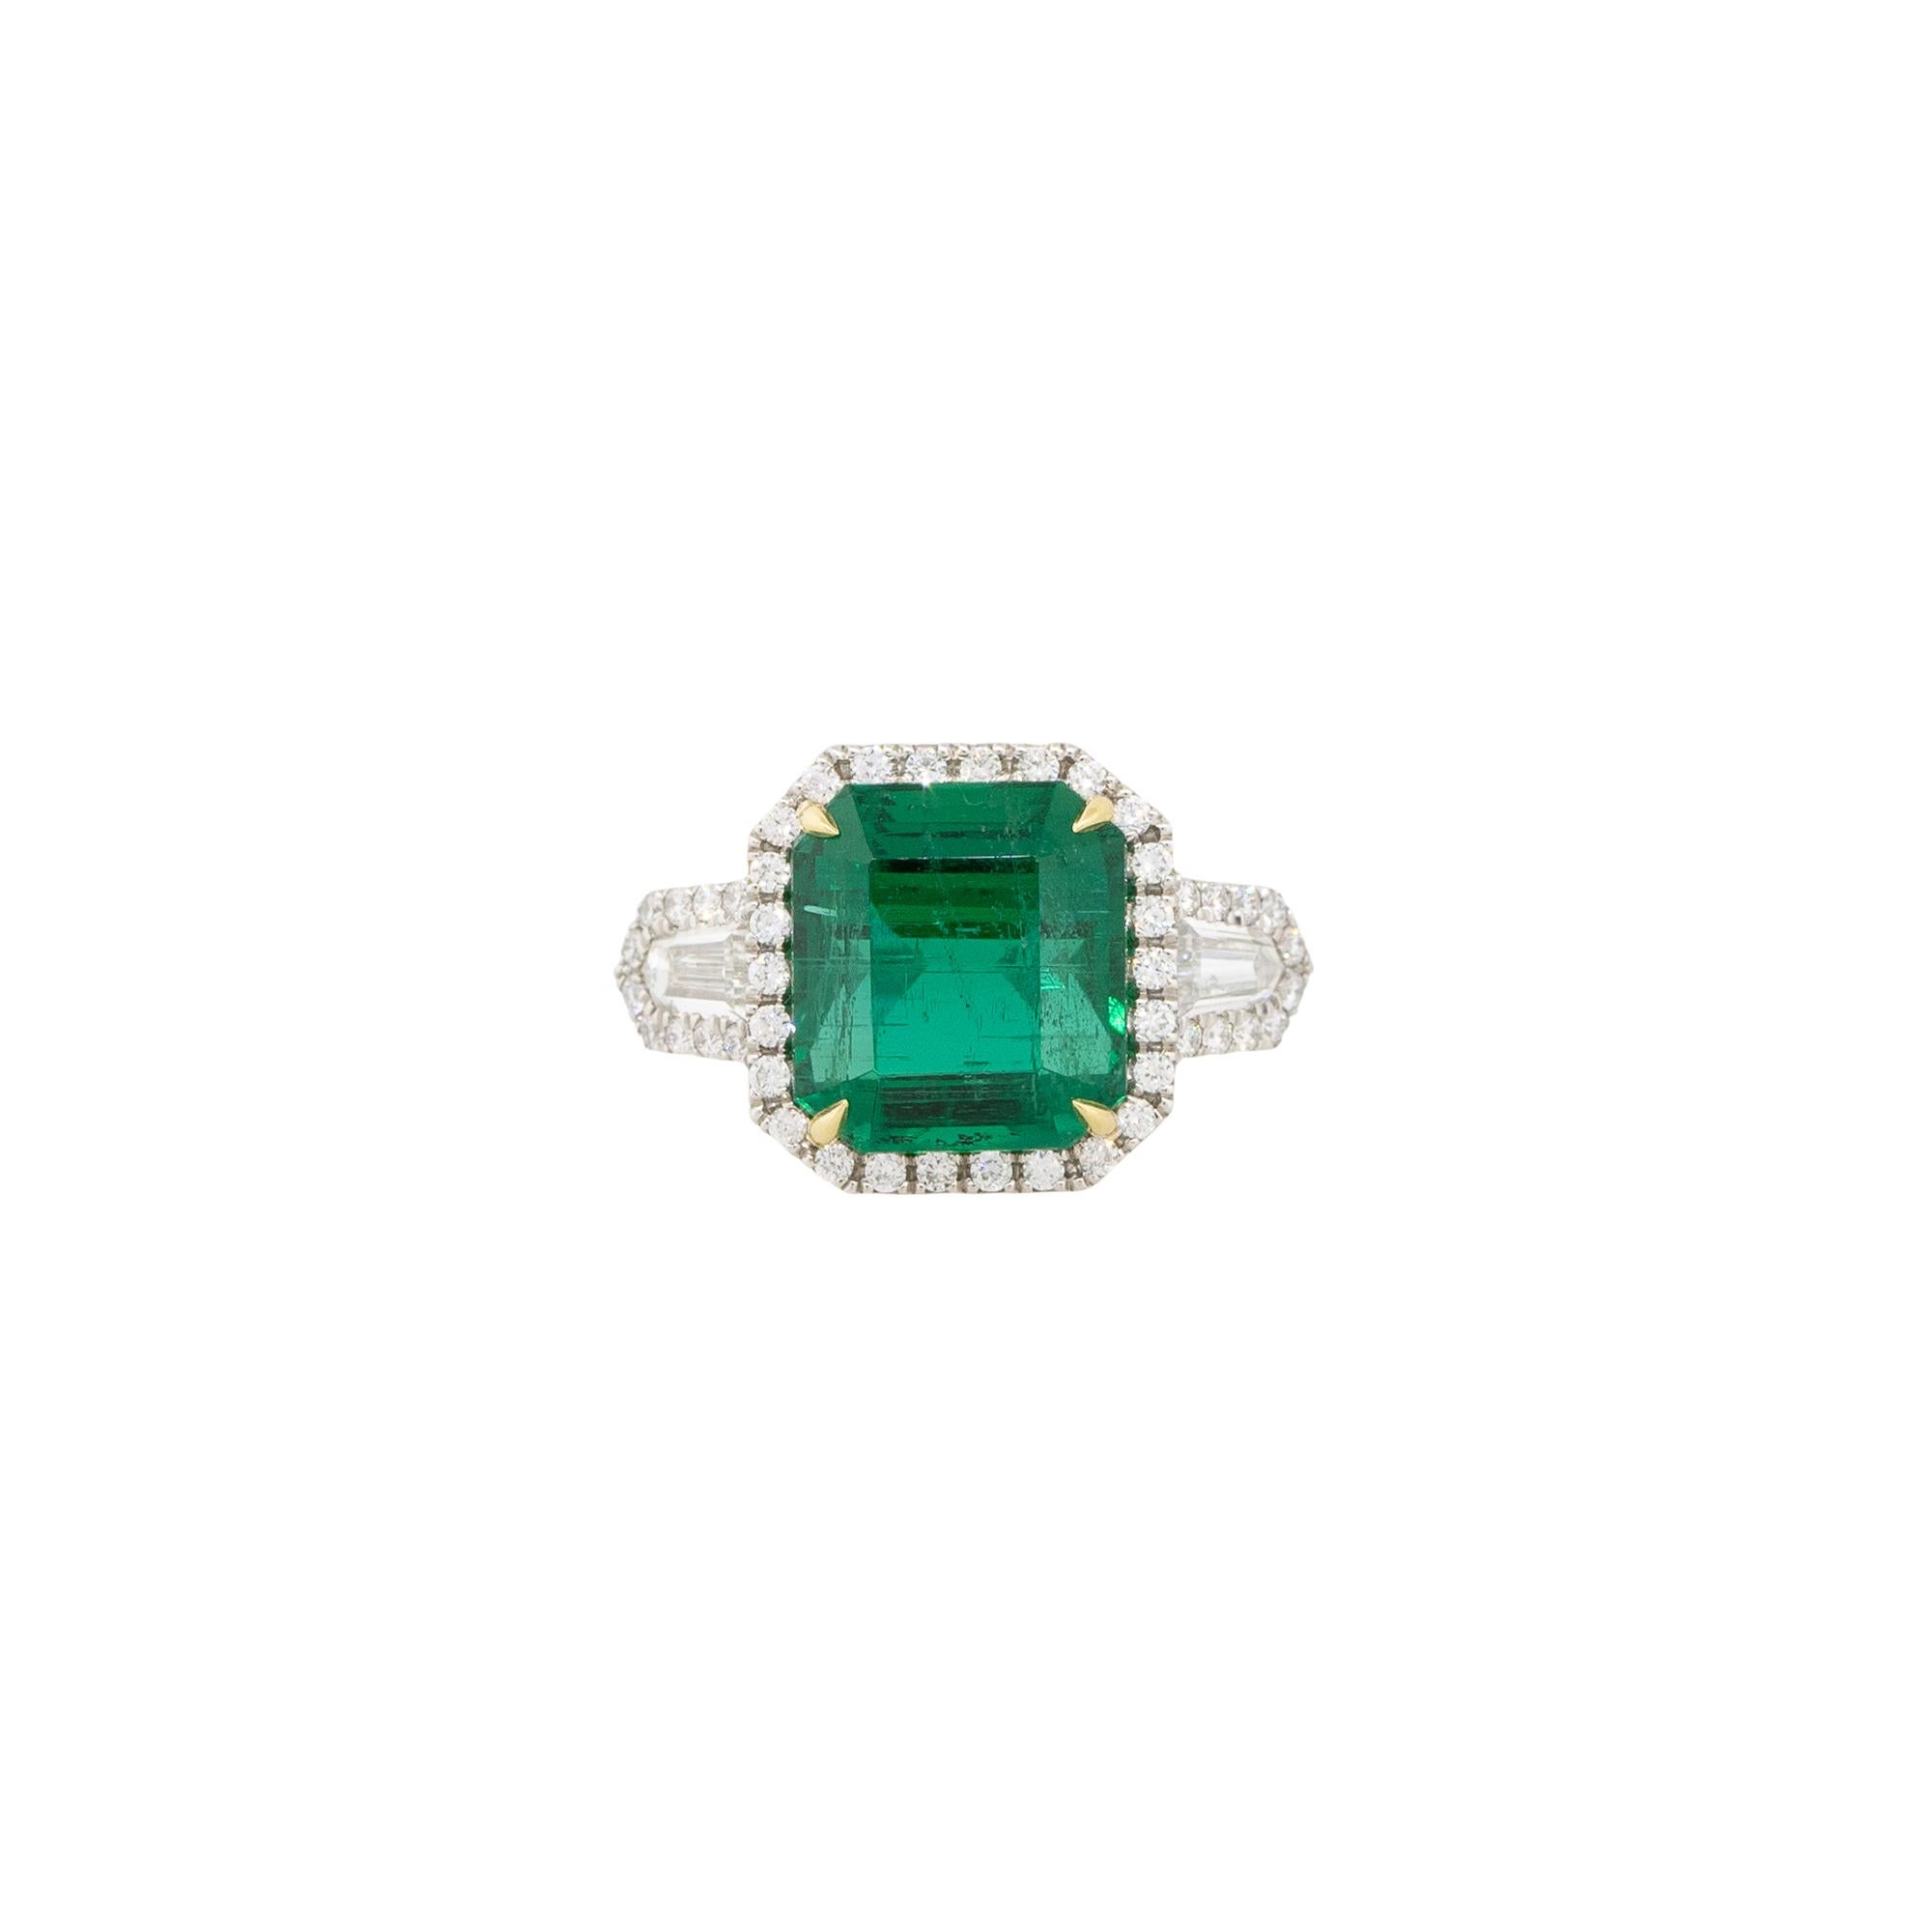 Platinum and 18k Yellow Gold 6.26ctw Emerald and Diamond Halo Ring

Style: Women's Emerald and Diamond Ring
Material: Platinum and 18k Yellow Gold
Gemstone/Diamond Details: Approximately 6.26ctw of Emerald cut Emeralds. Approximately 0.53ctw of